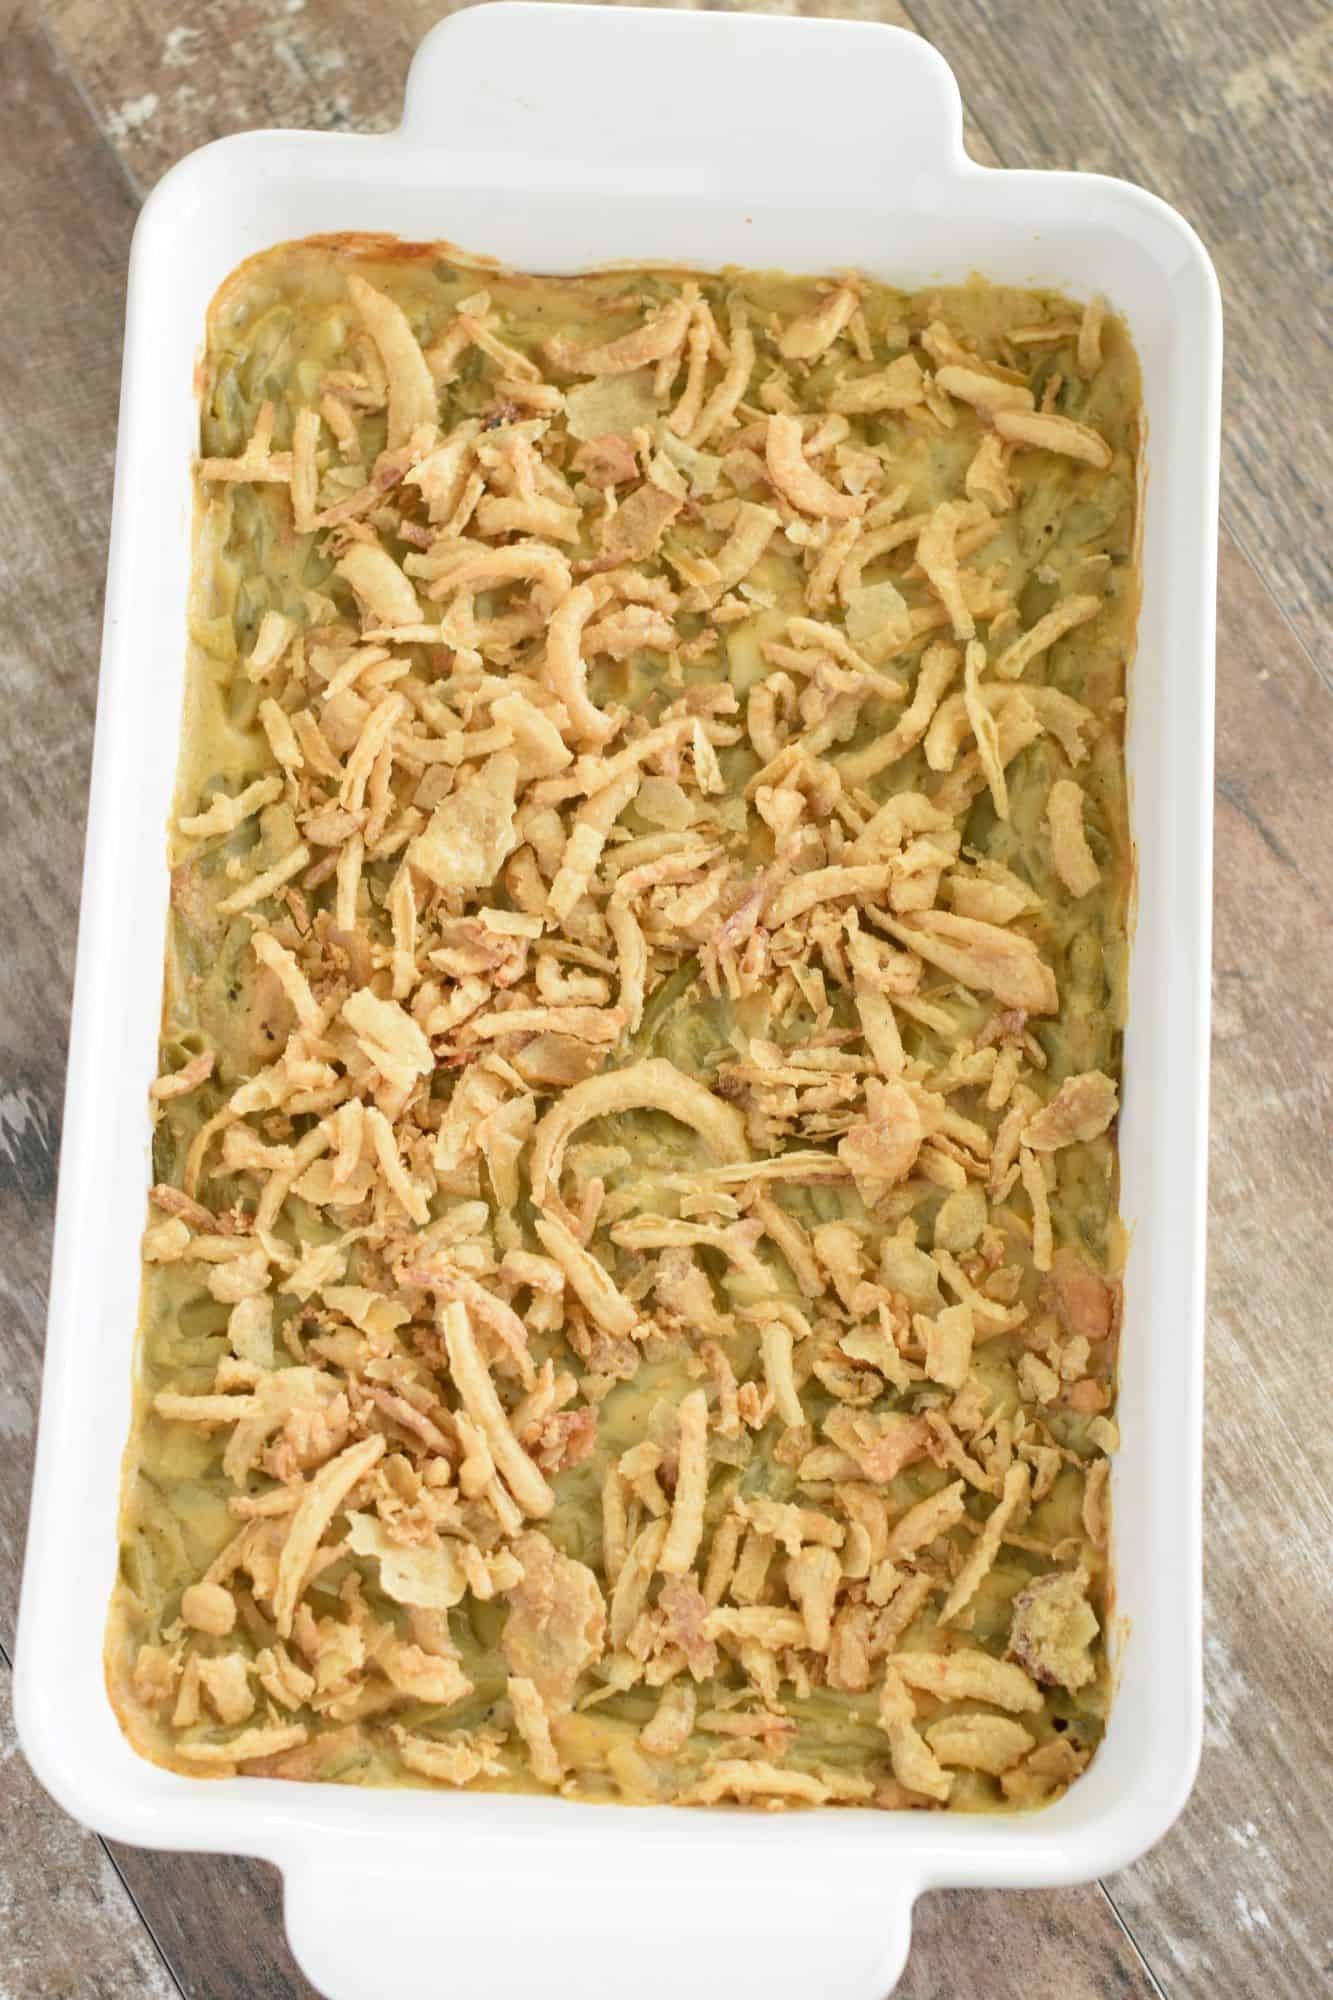 crispy onions added to baked casserole